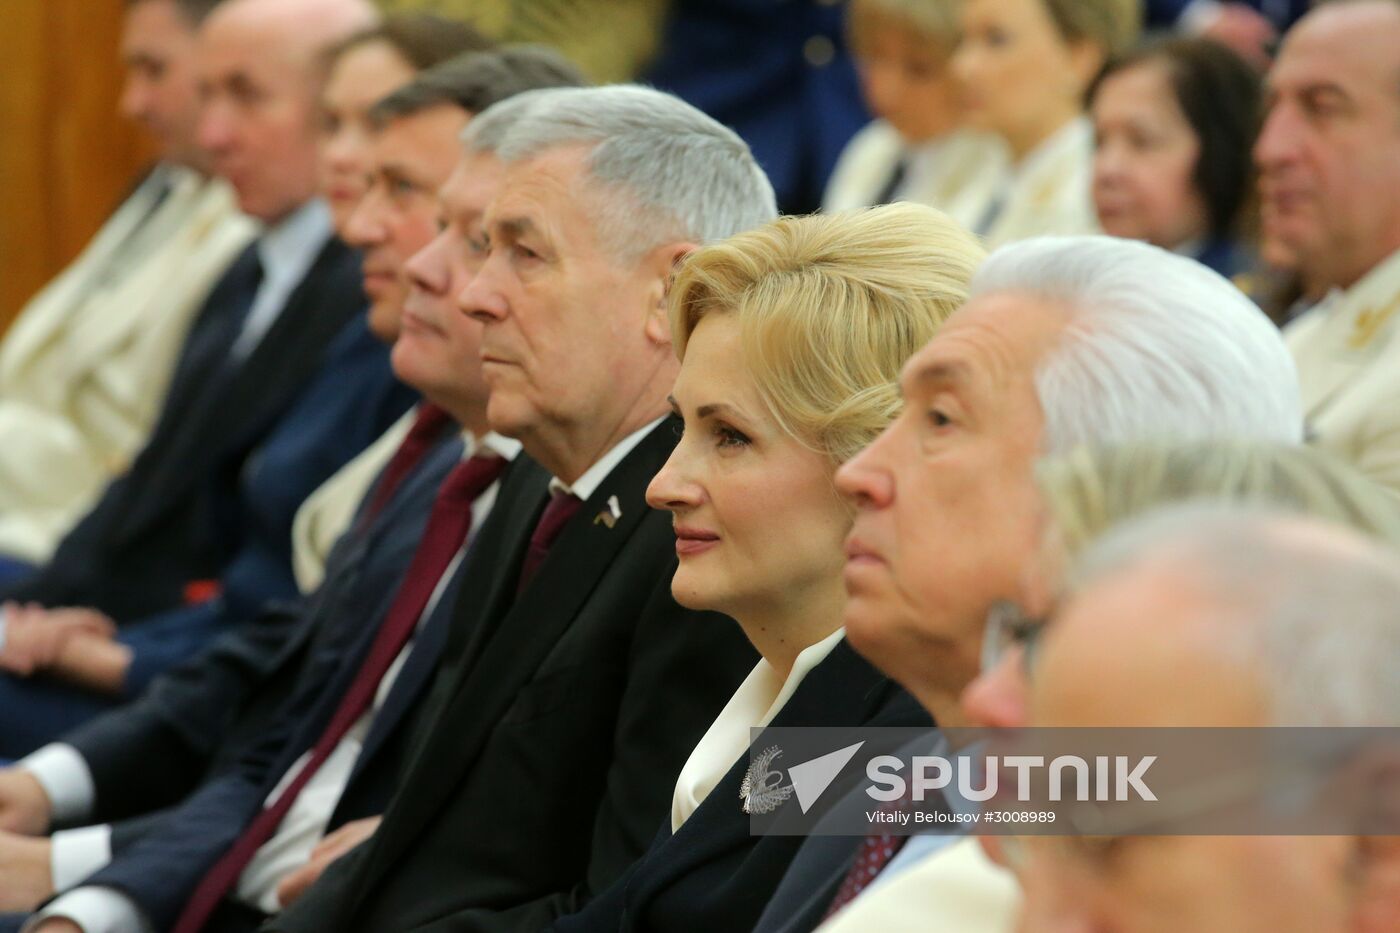 Meeting on the 295th anniversary of the Russian Prosecution Service